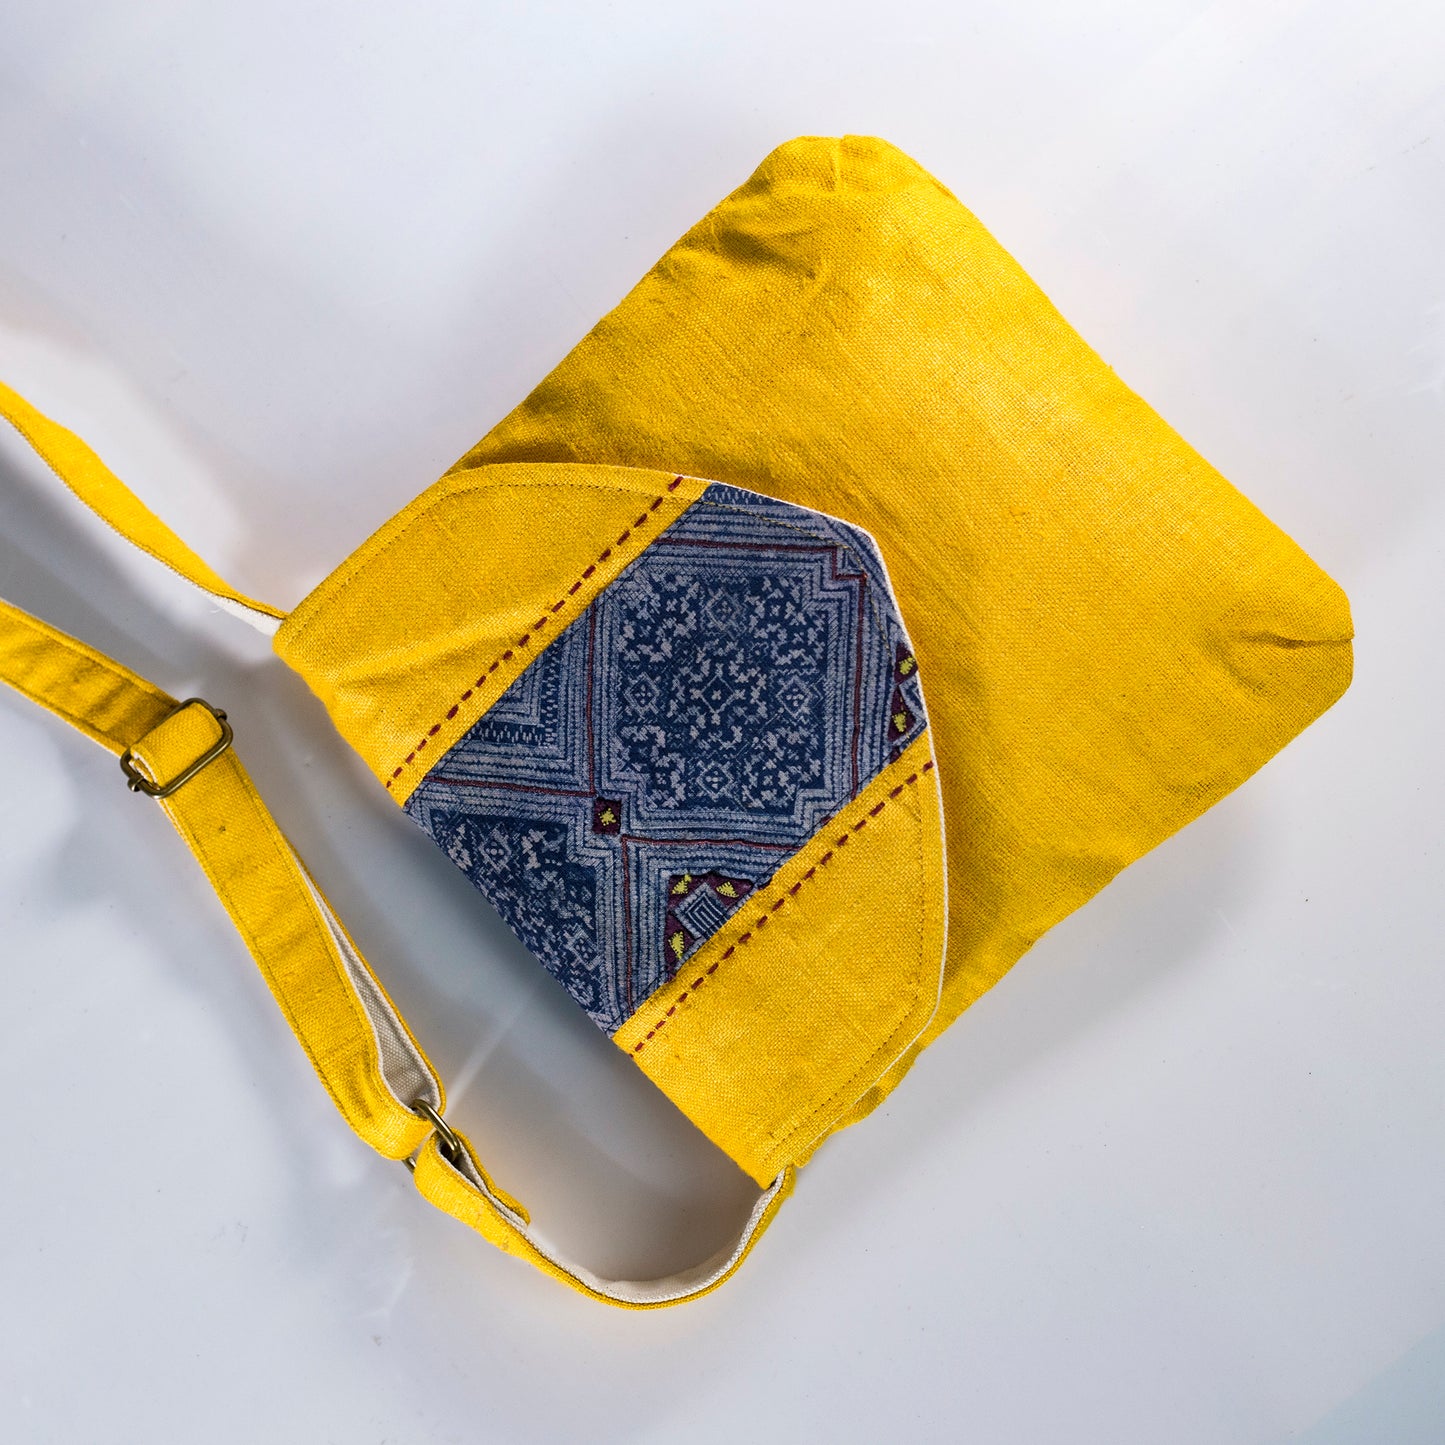 Purity Collection: Cross-body bag, natural hemp in YELLOW with vintage patch